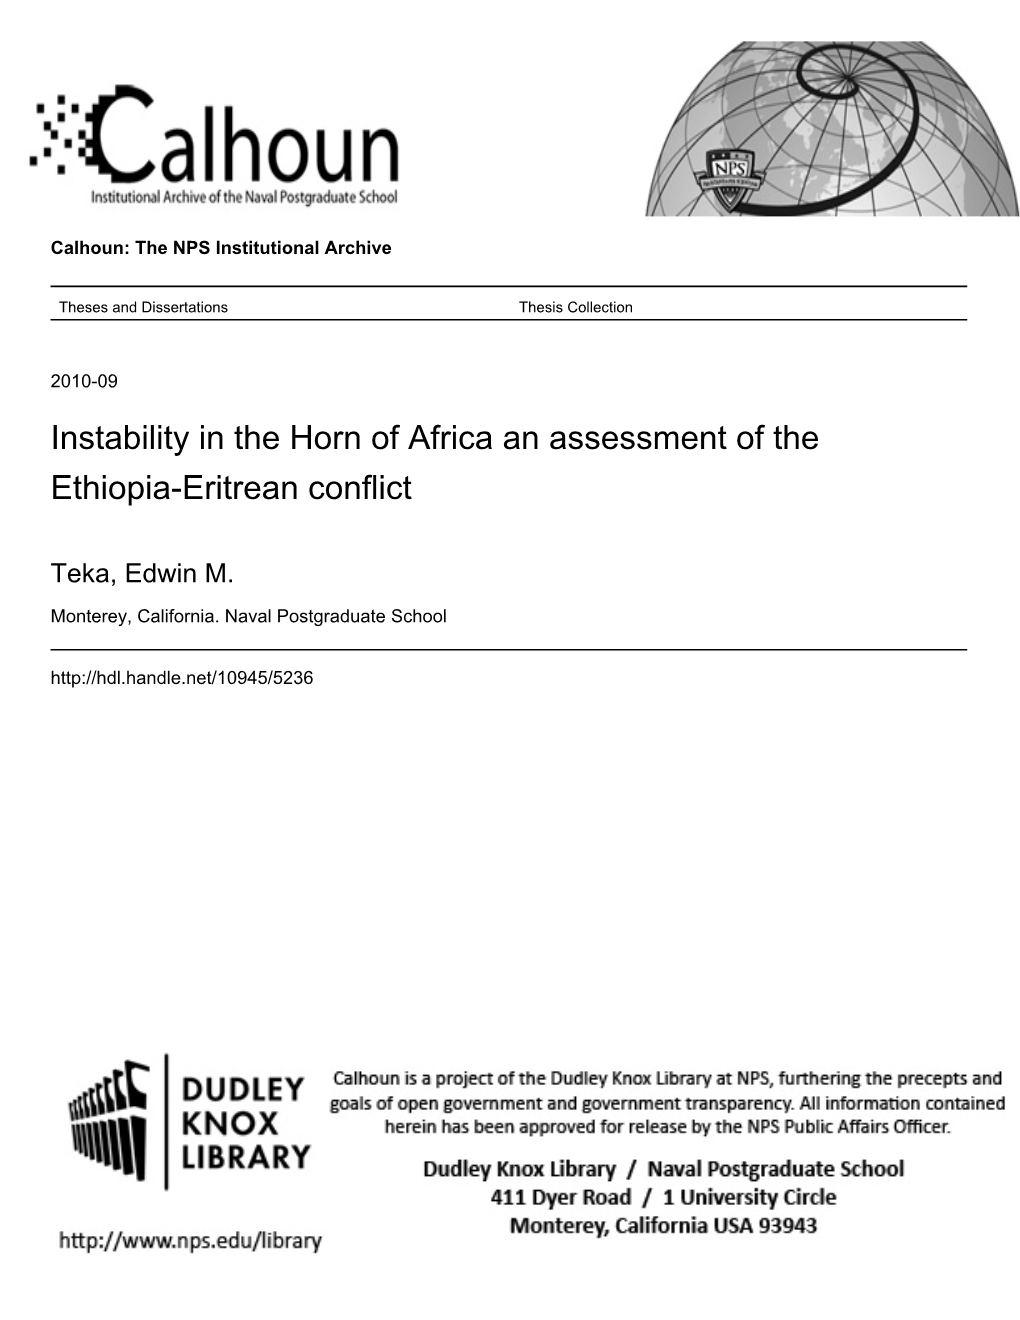 Instability in the Horn of Africa an Assessment of the Ethiopia-Eritrean Conflict